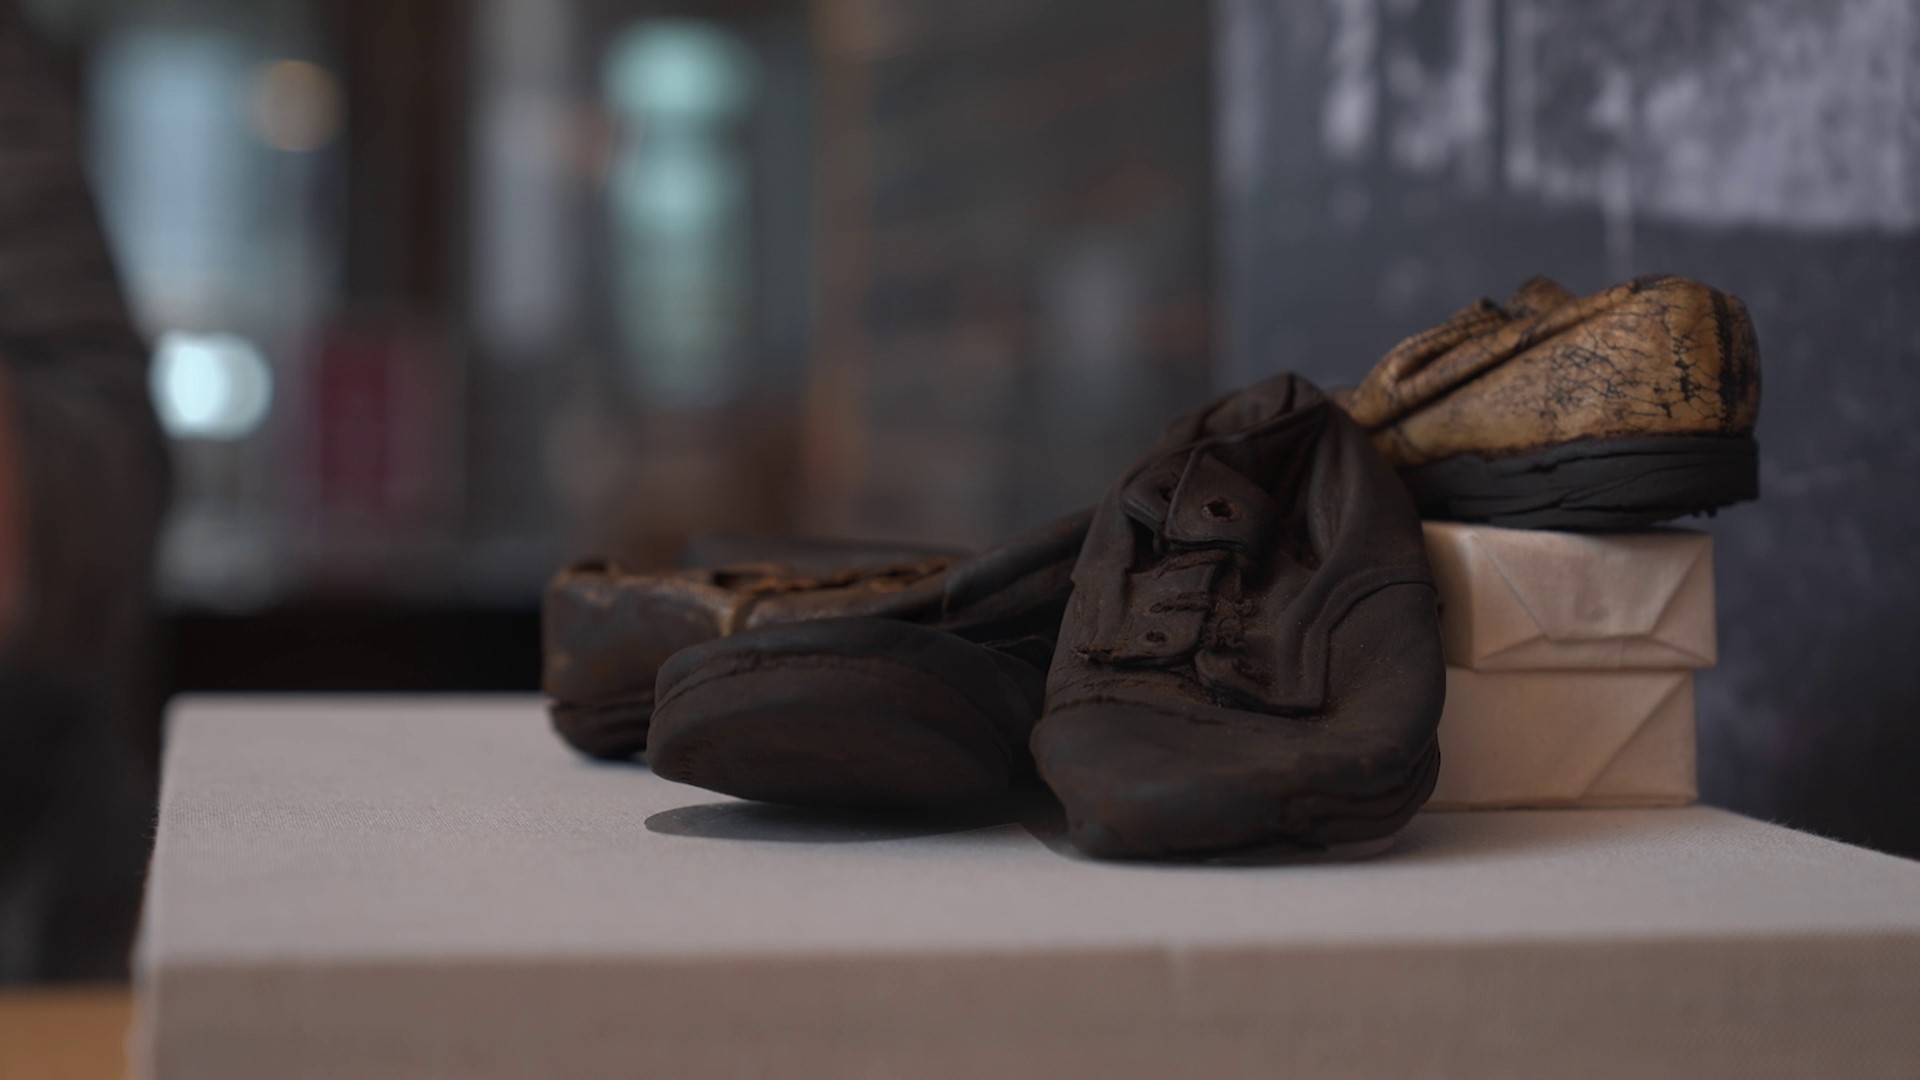 The shoes were displayed at the Dallas Holocaust and Human Rights Museum ahead of Holocaust Remembrance Day.